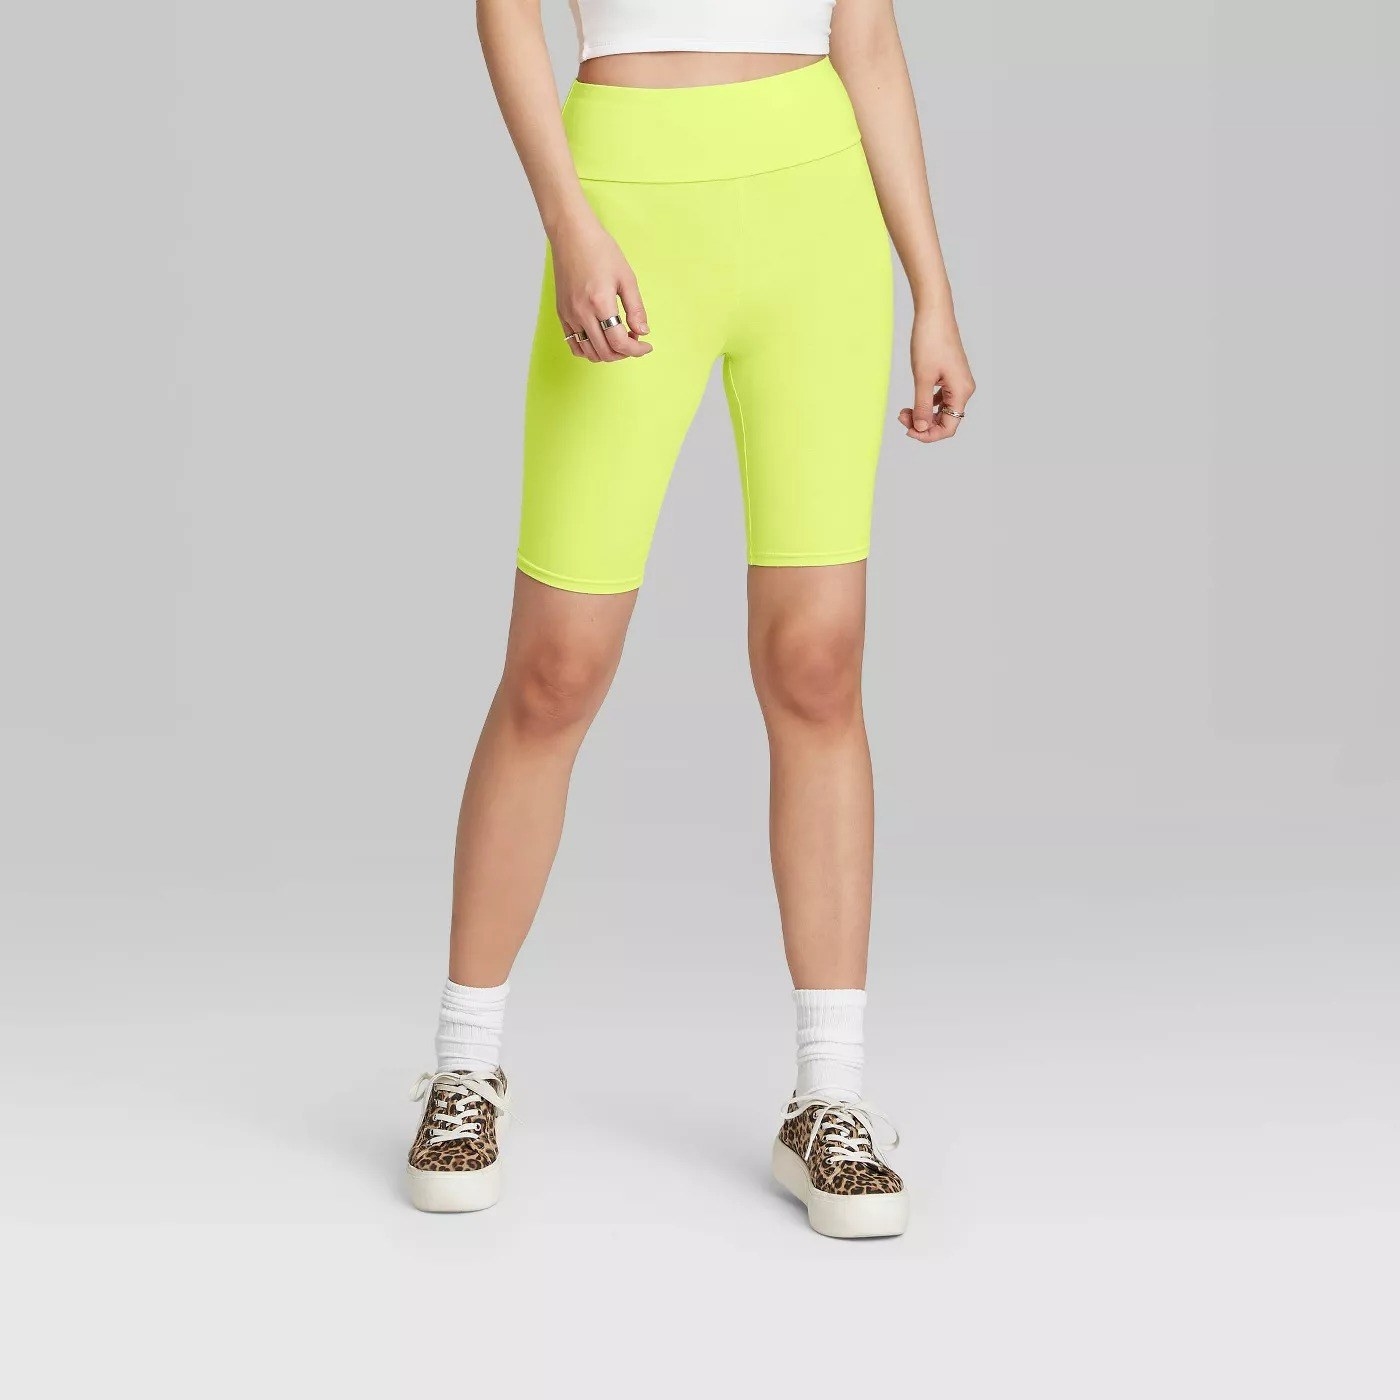 Model wearing tight  neon yellow shorts, stop above the knee